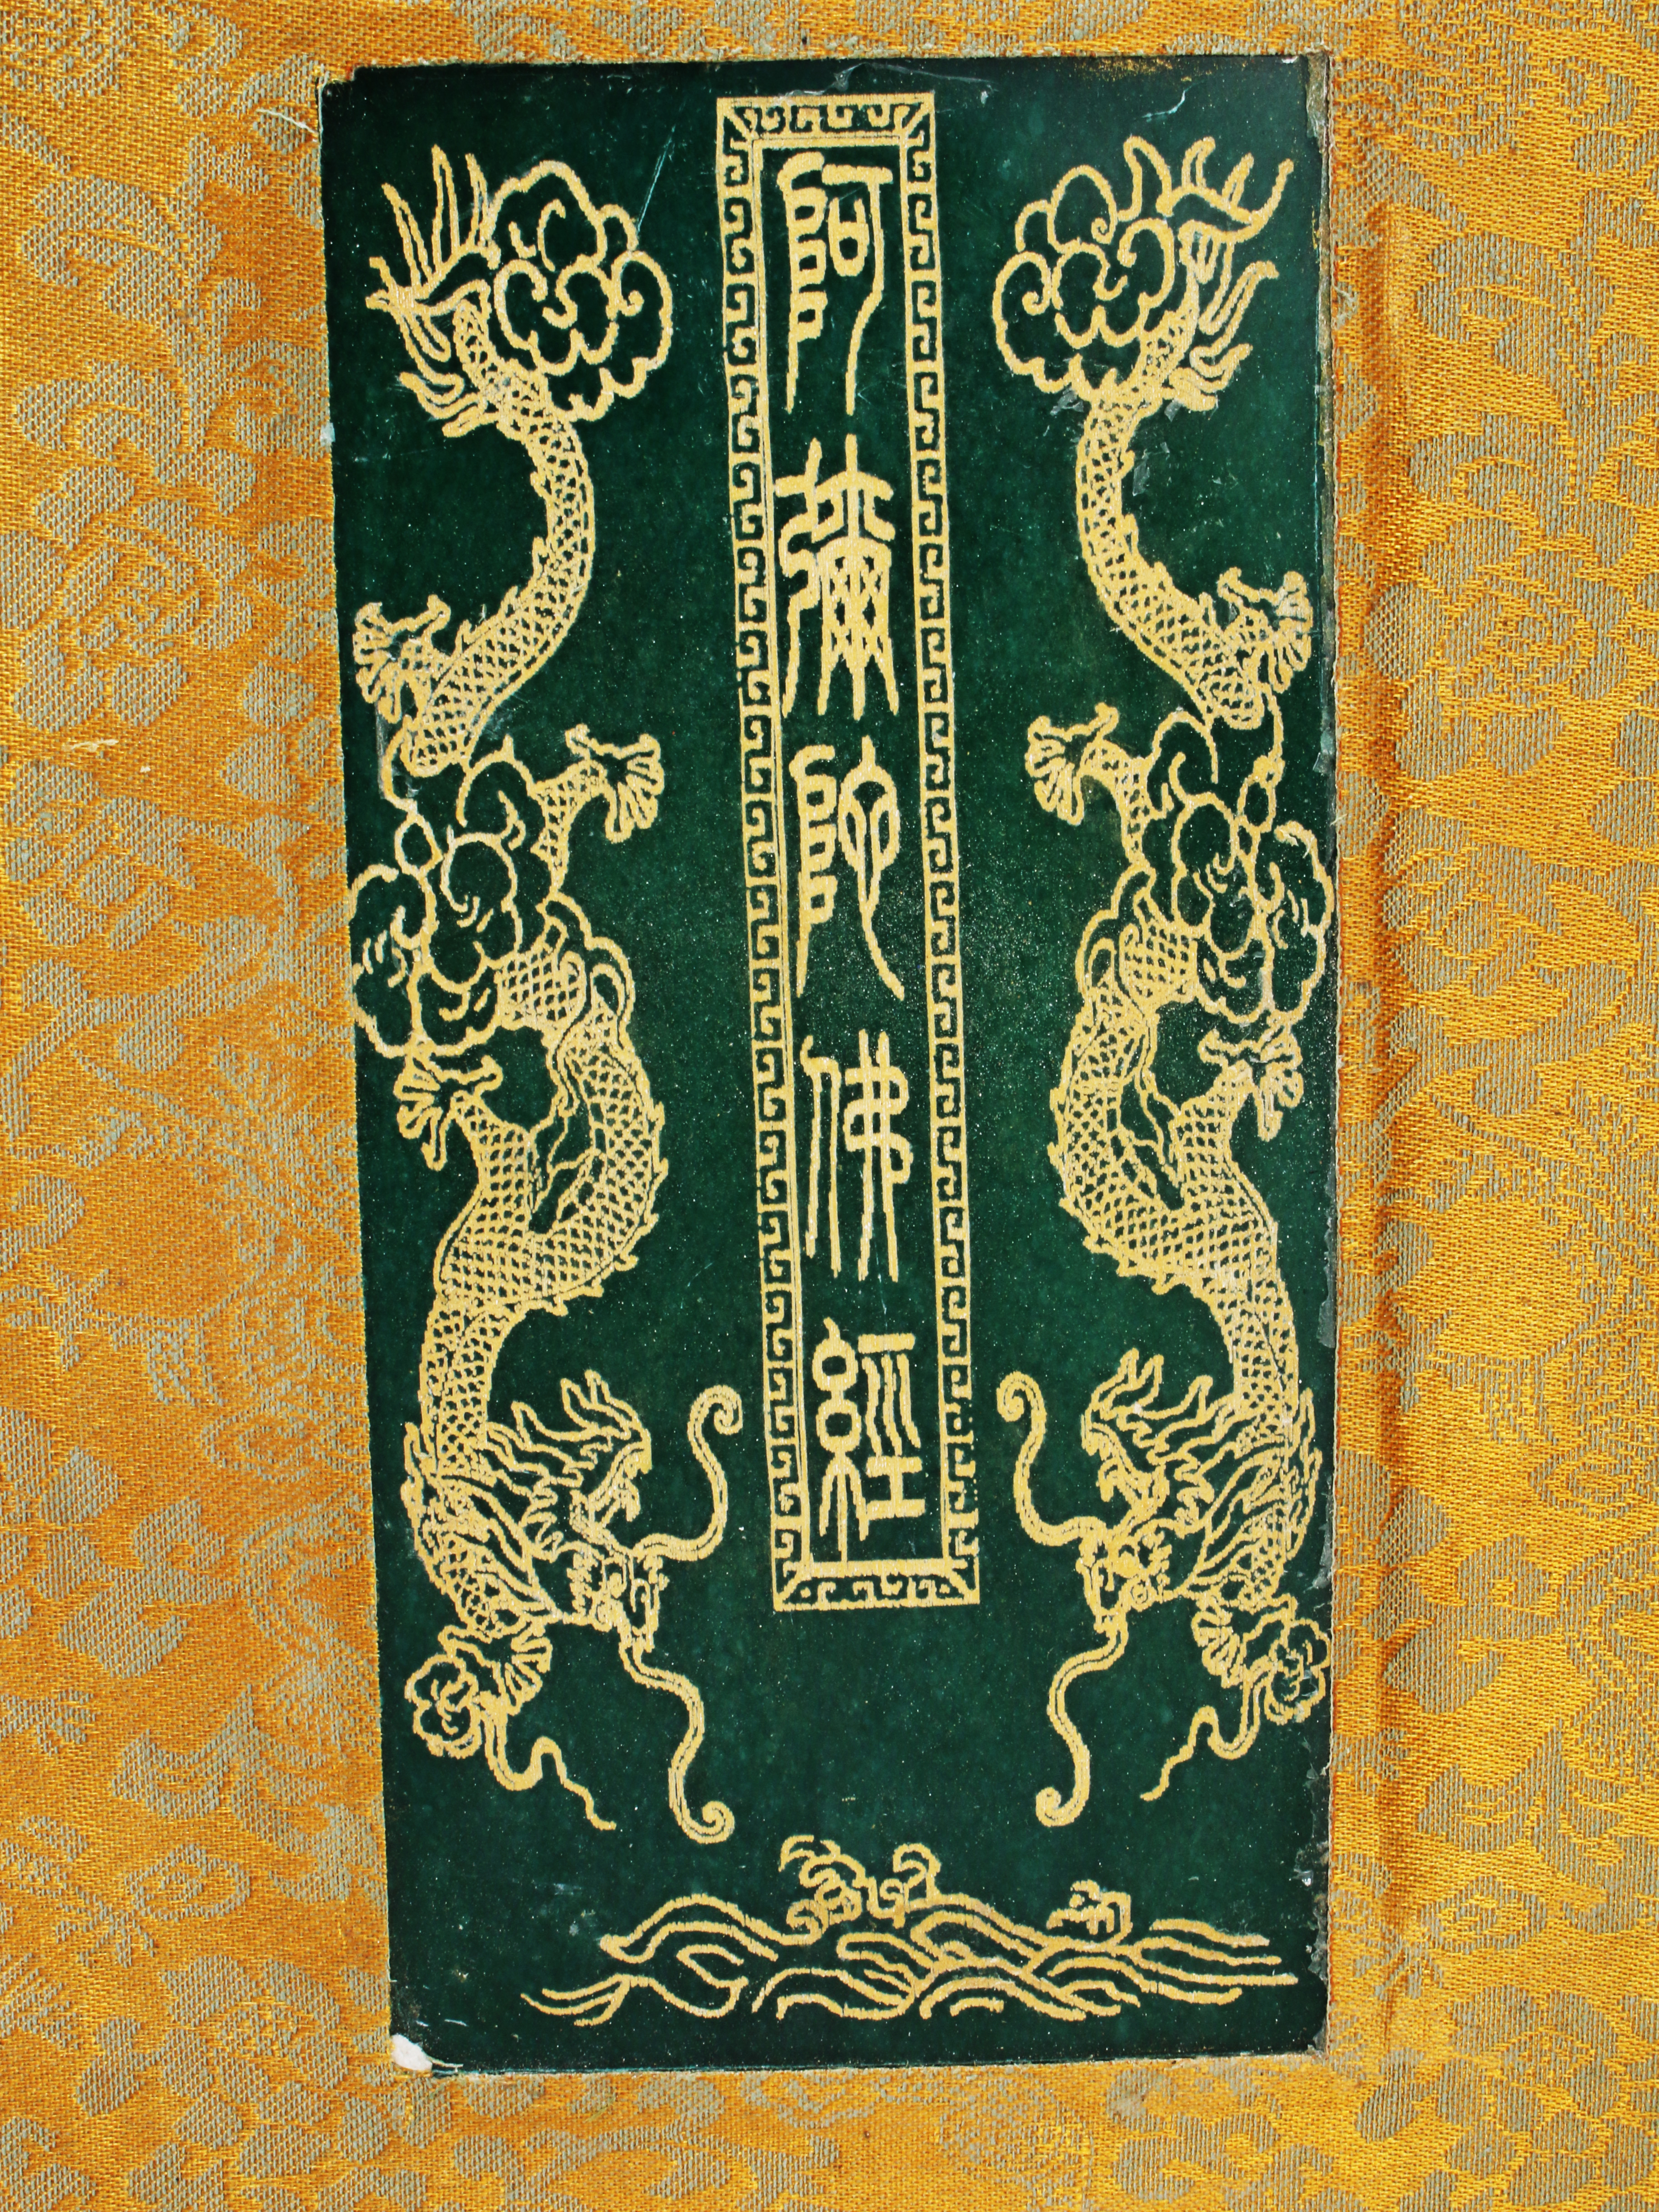 Intricate Tibetan Carved Jade Book - Religious Text image 3